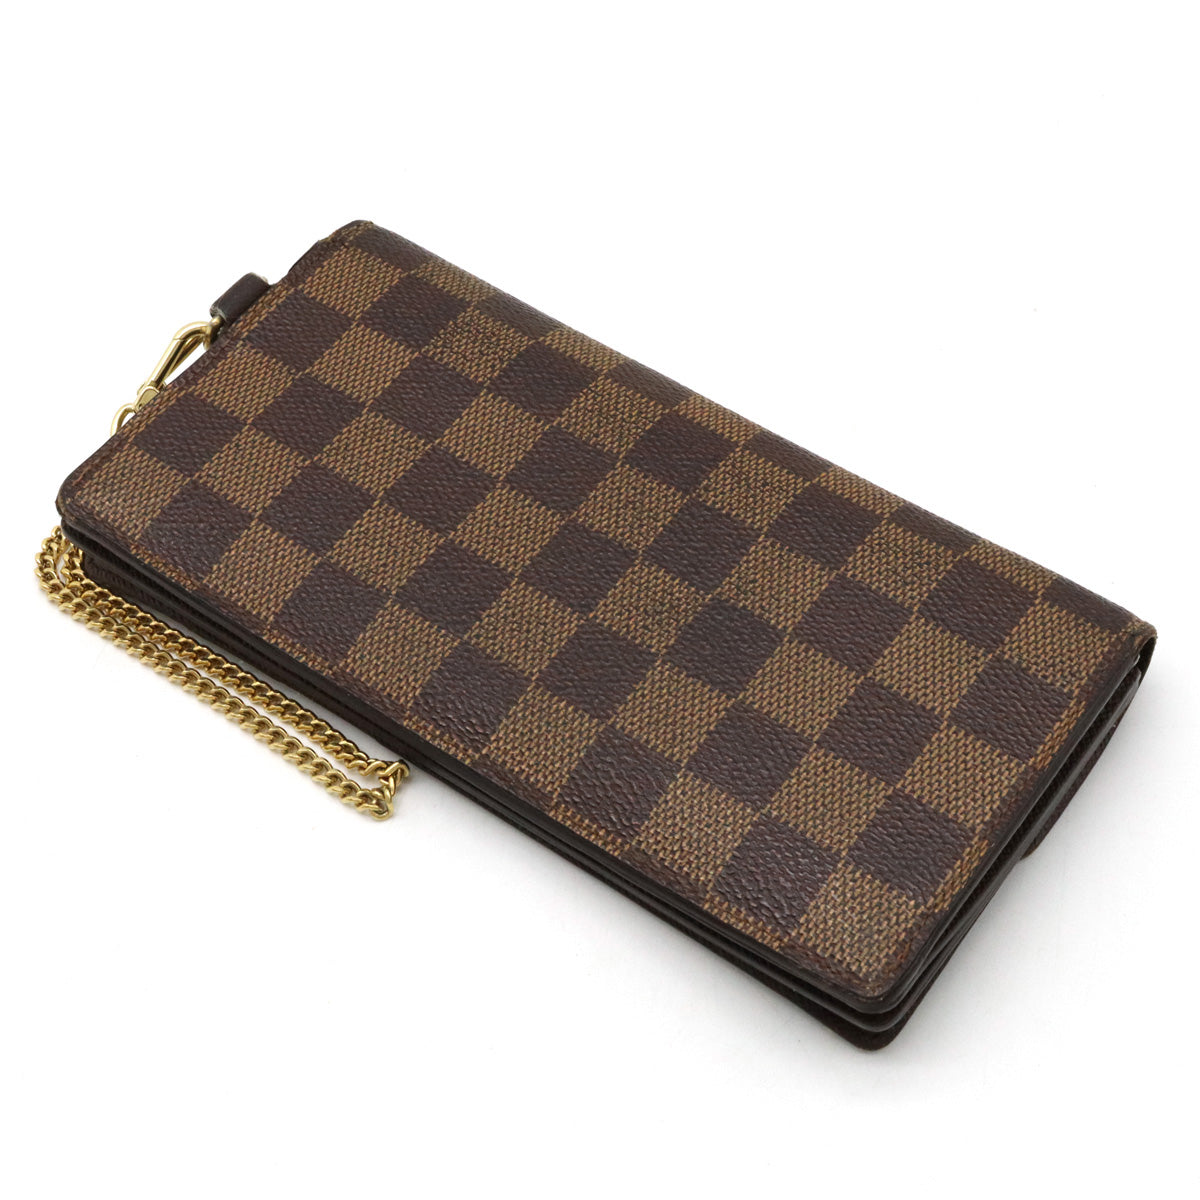 Louis Vuitton - Authenticated Emilie Wallet - Cloth Brown For Woman, Very Good Condition